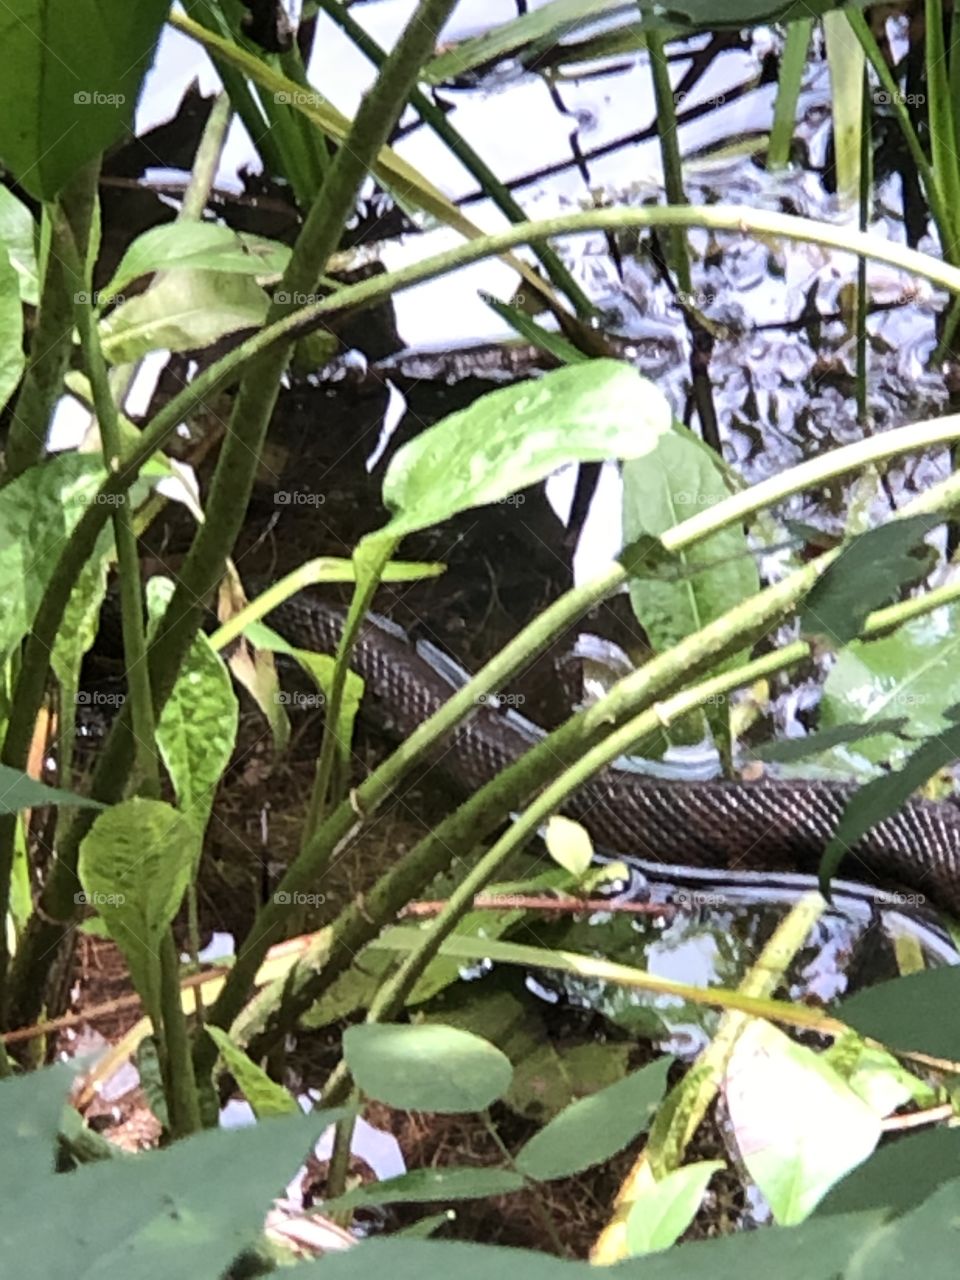 Cottonmouth Water Moccasin 